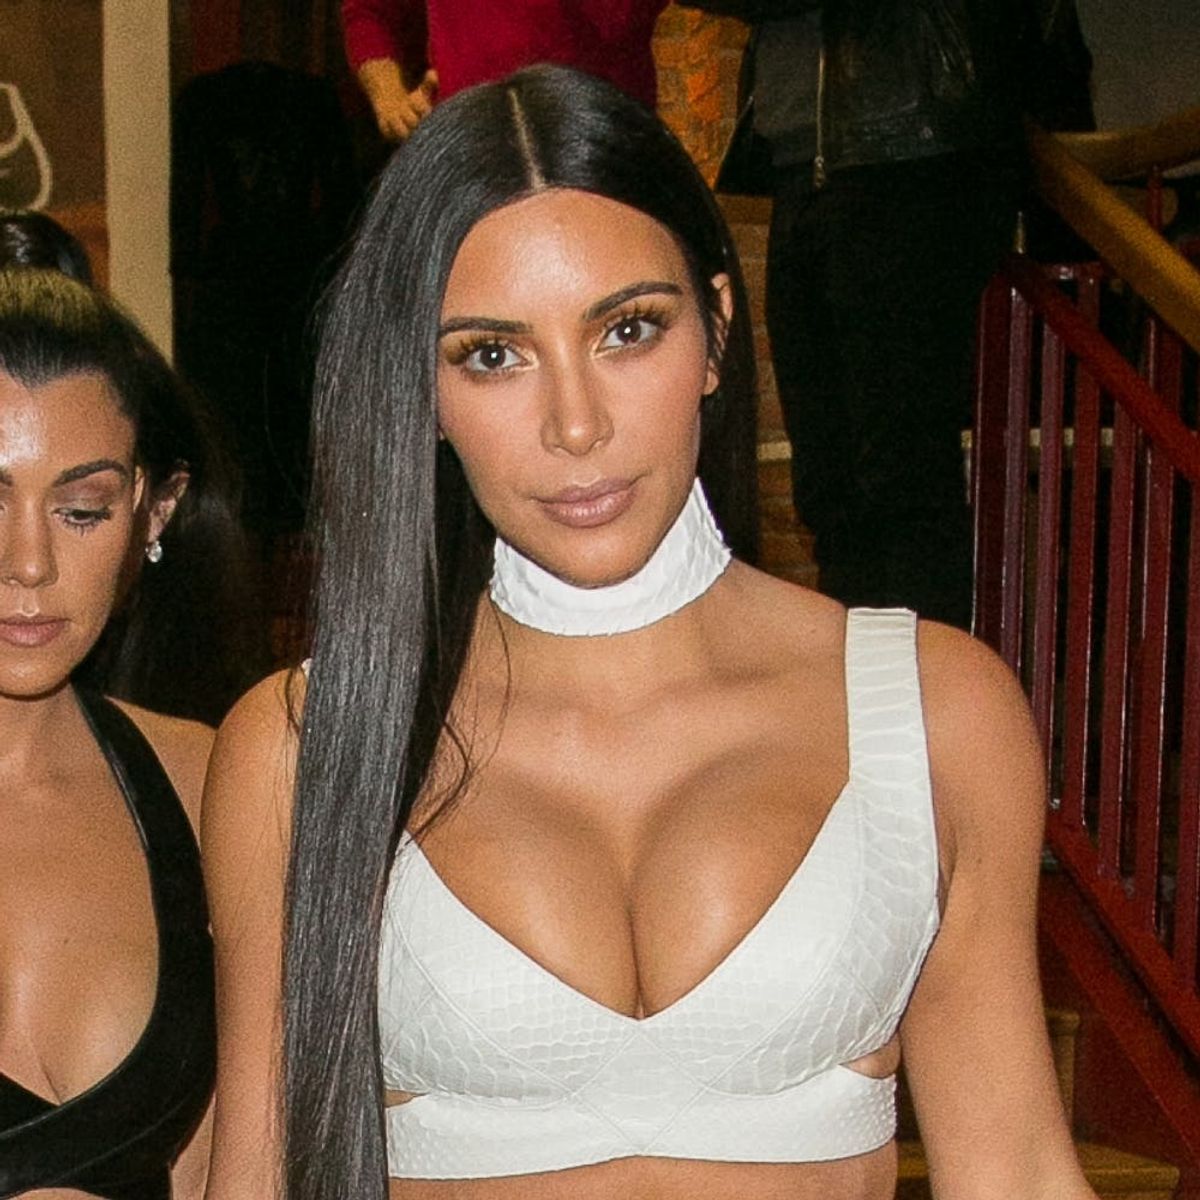 16 Arrests Have Been Made in Connection to Kim Kardashian’s Robbery